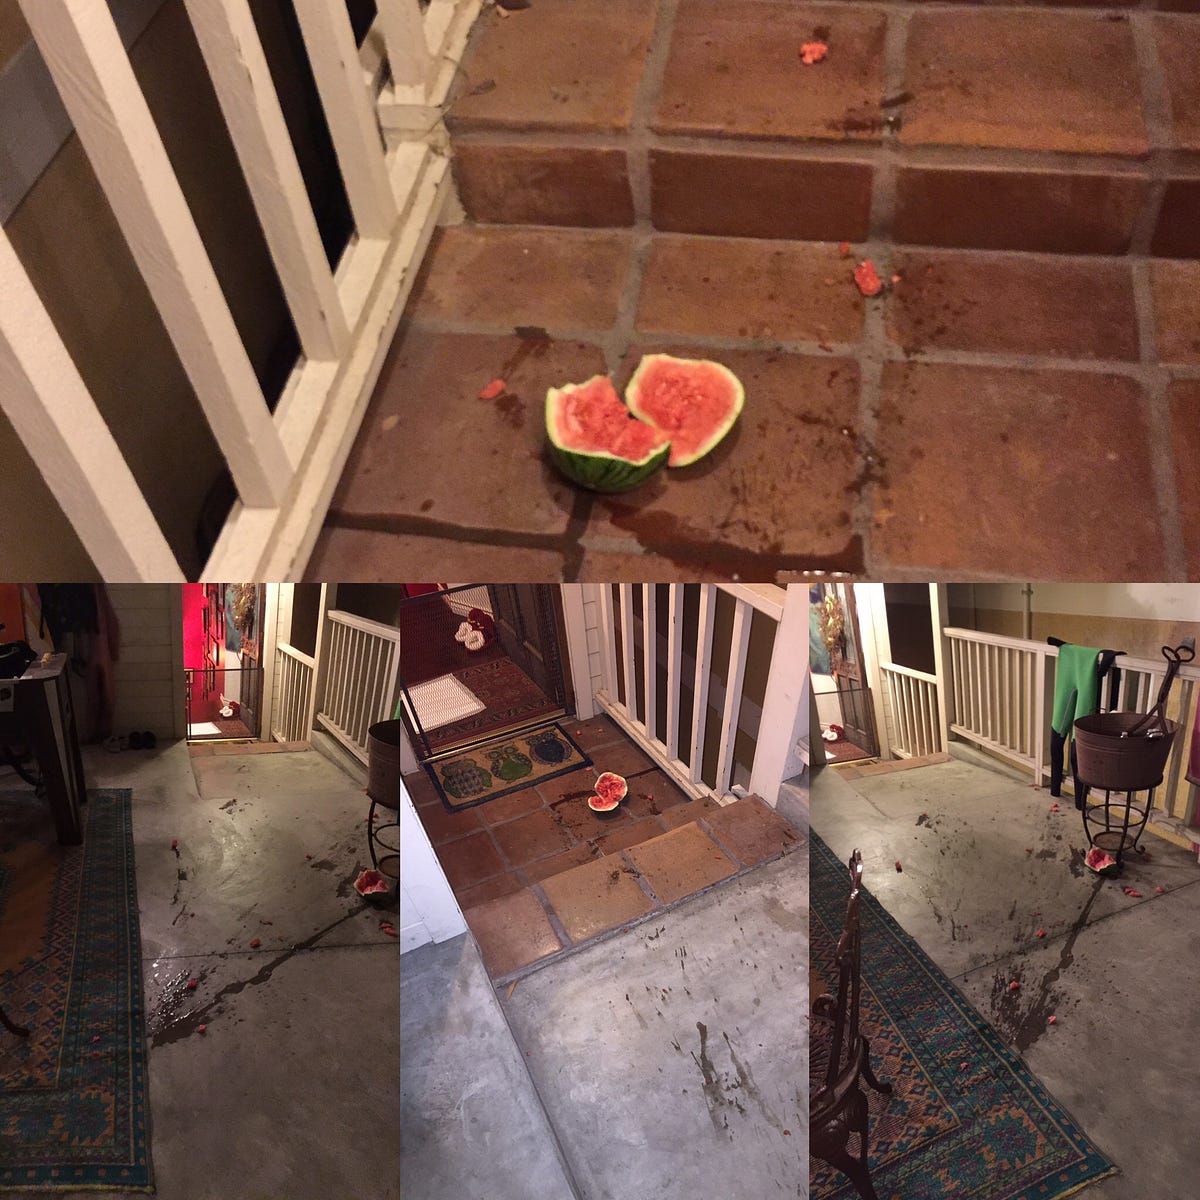 Someone left a watermelon on their doorstep overnight. Nobody lives in that  house. : r/mildlyinteresting